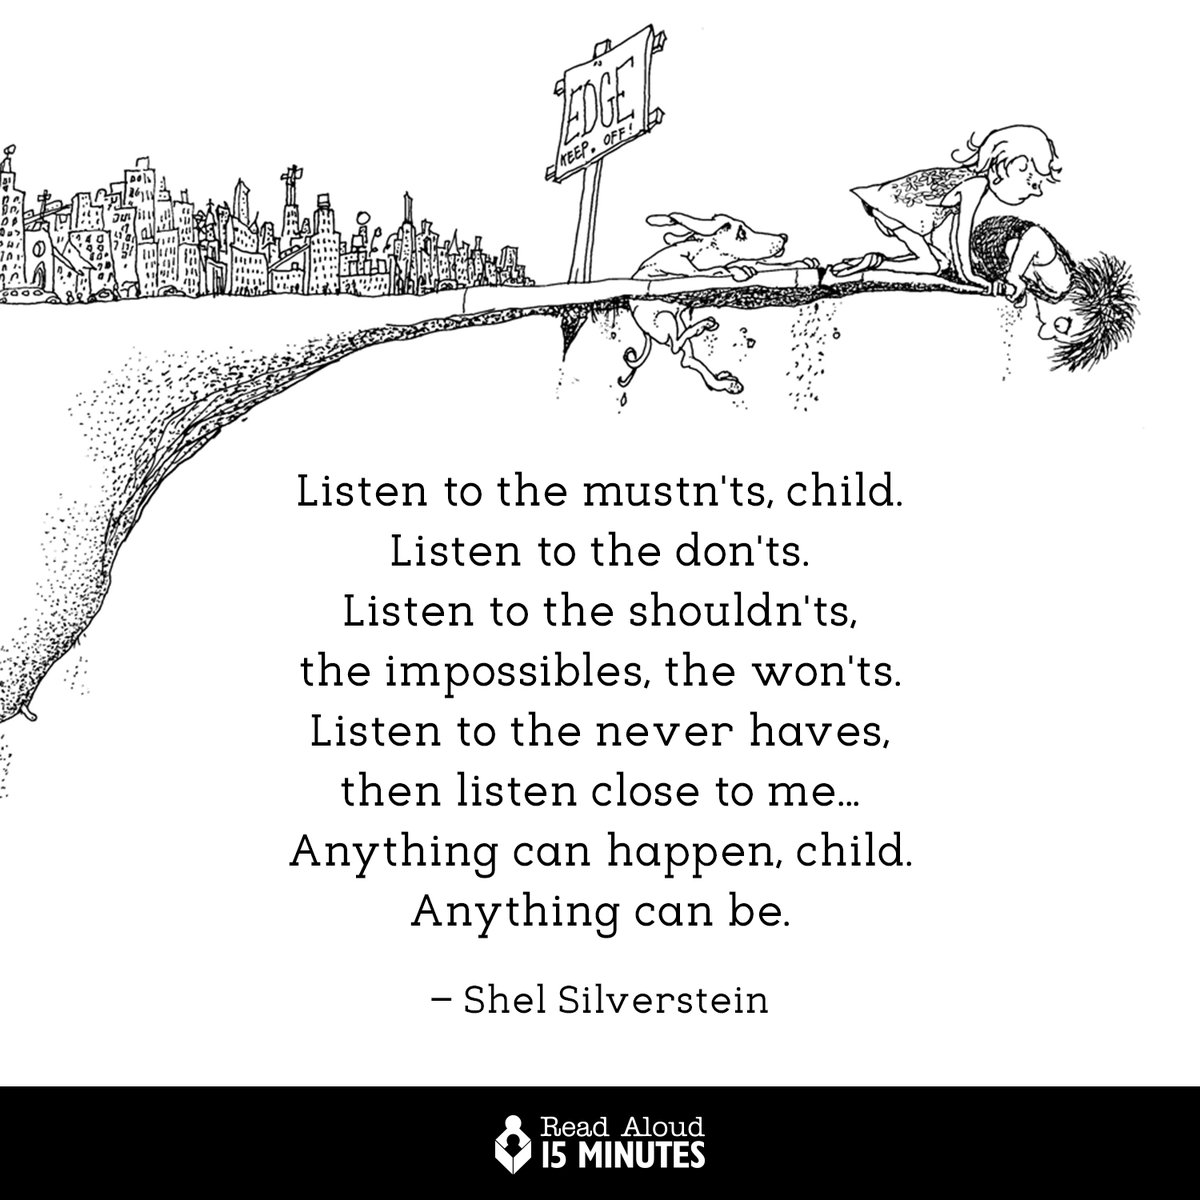 Today marks the birthday of Shel Silverstein (1930-1999), bestselling children's book author and illustrator.